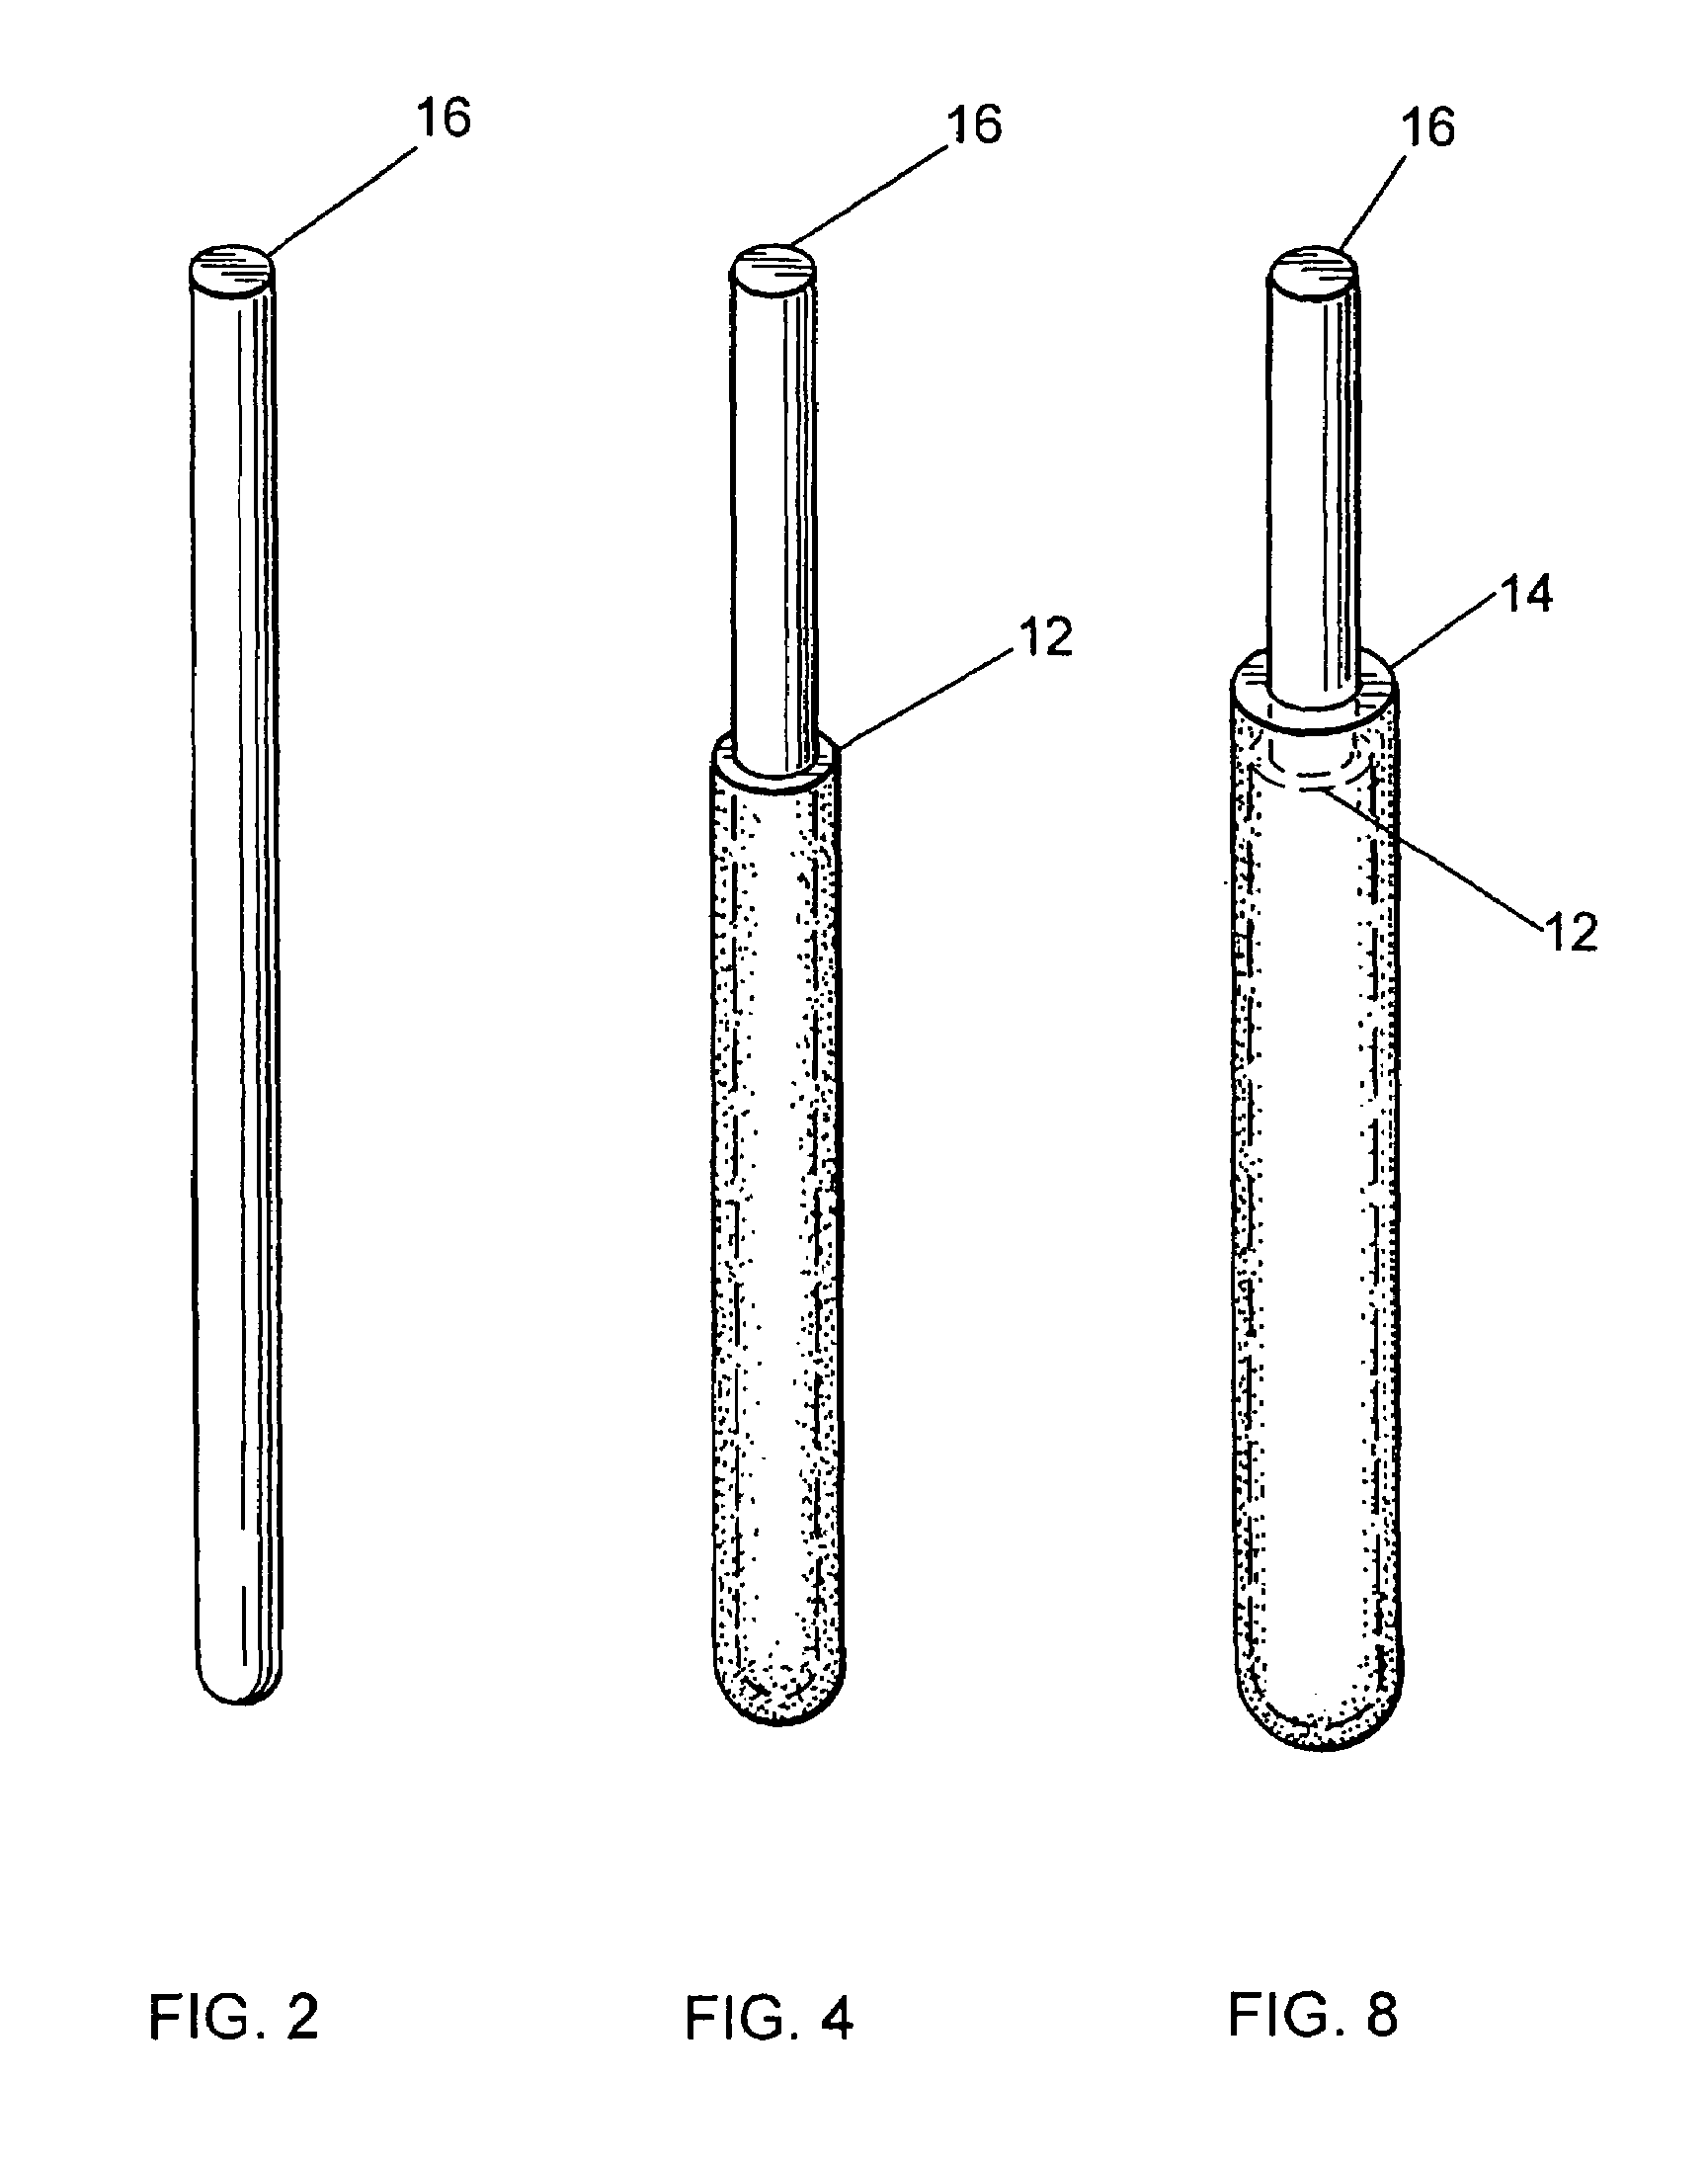 Clad tube for nuclear fuel